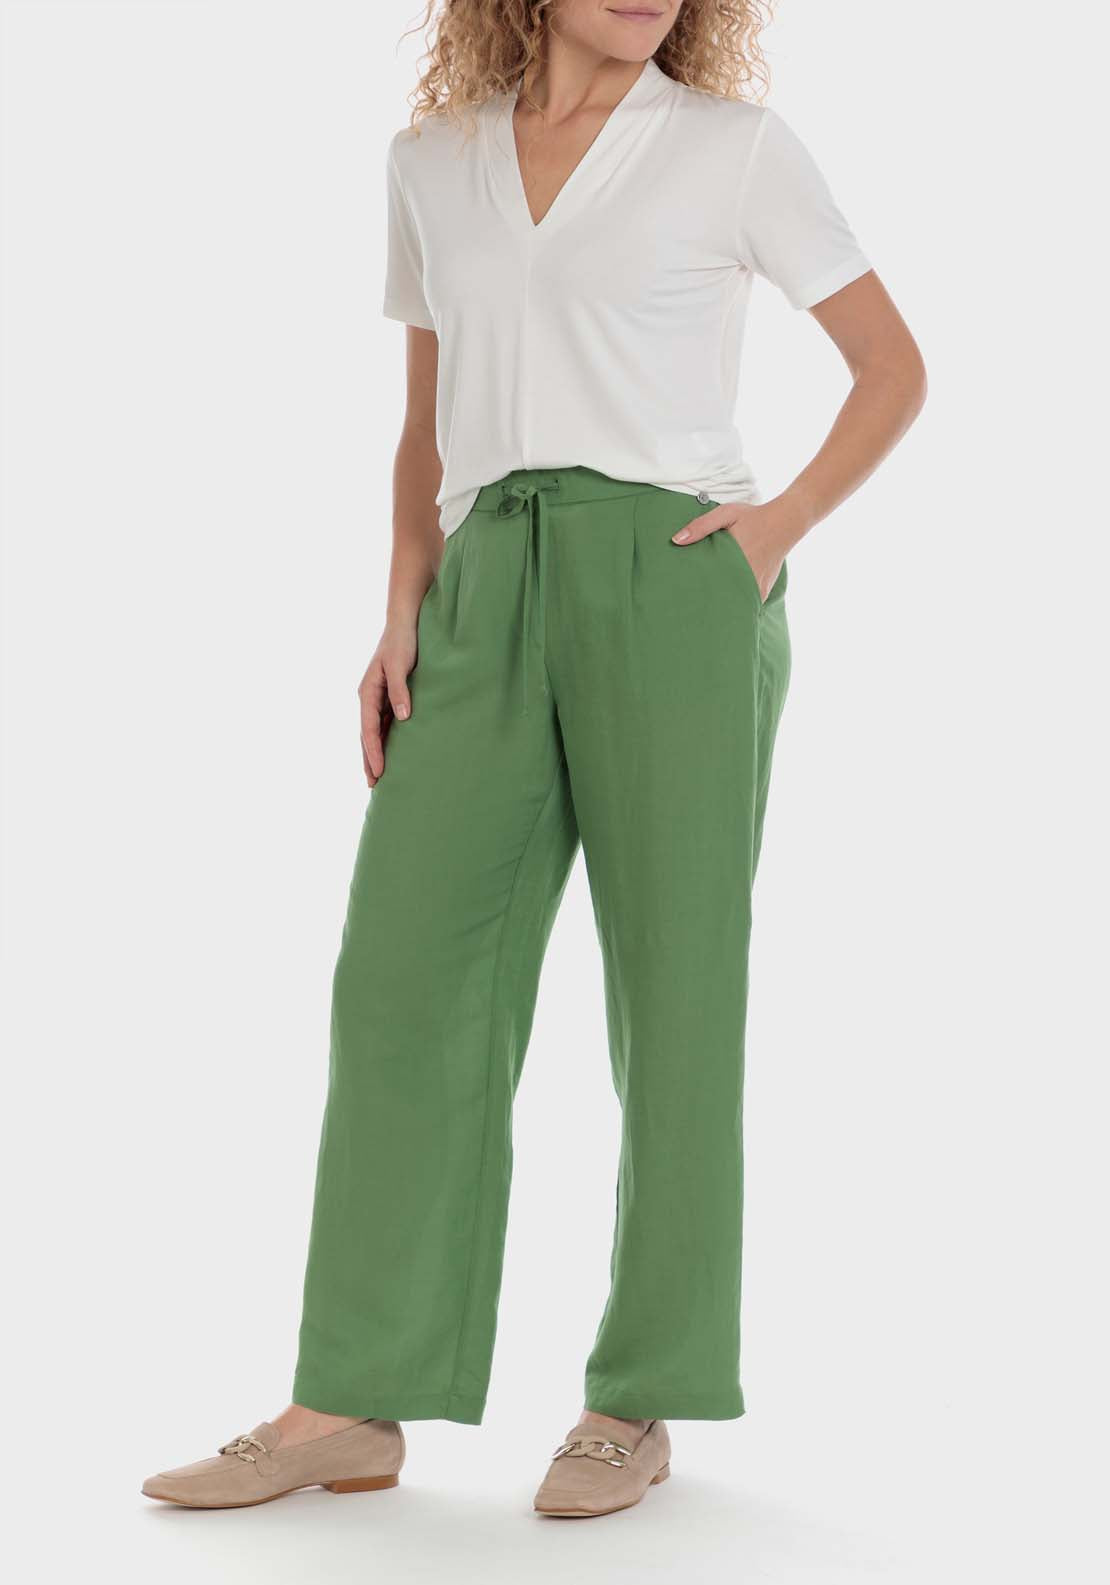 Punt Roma Linen Trousers - Green 4 Shaws Department Stores